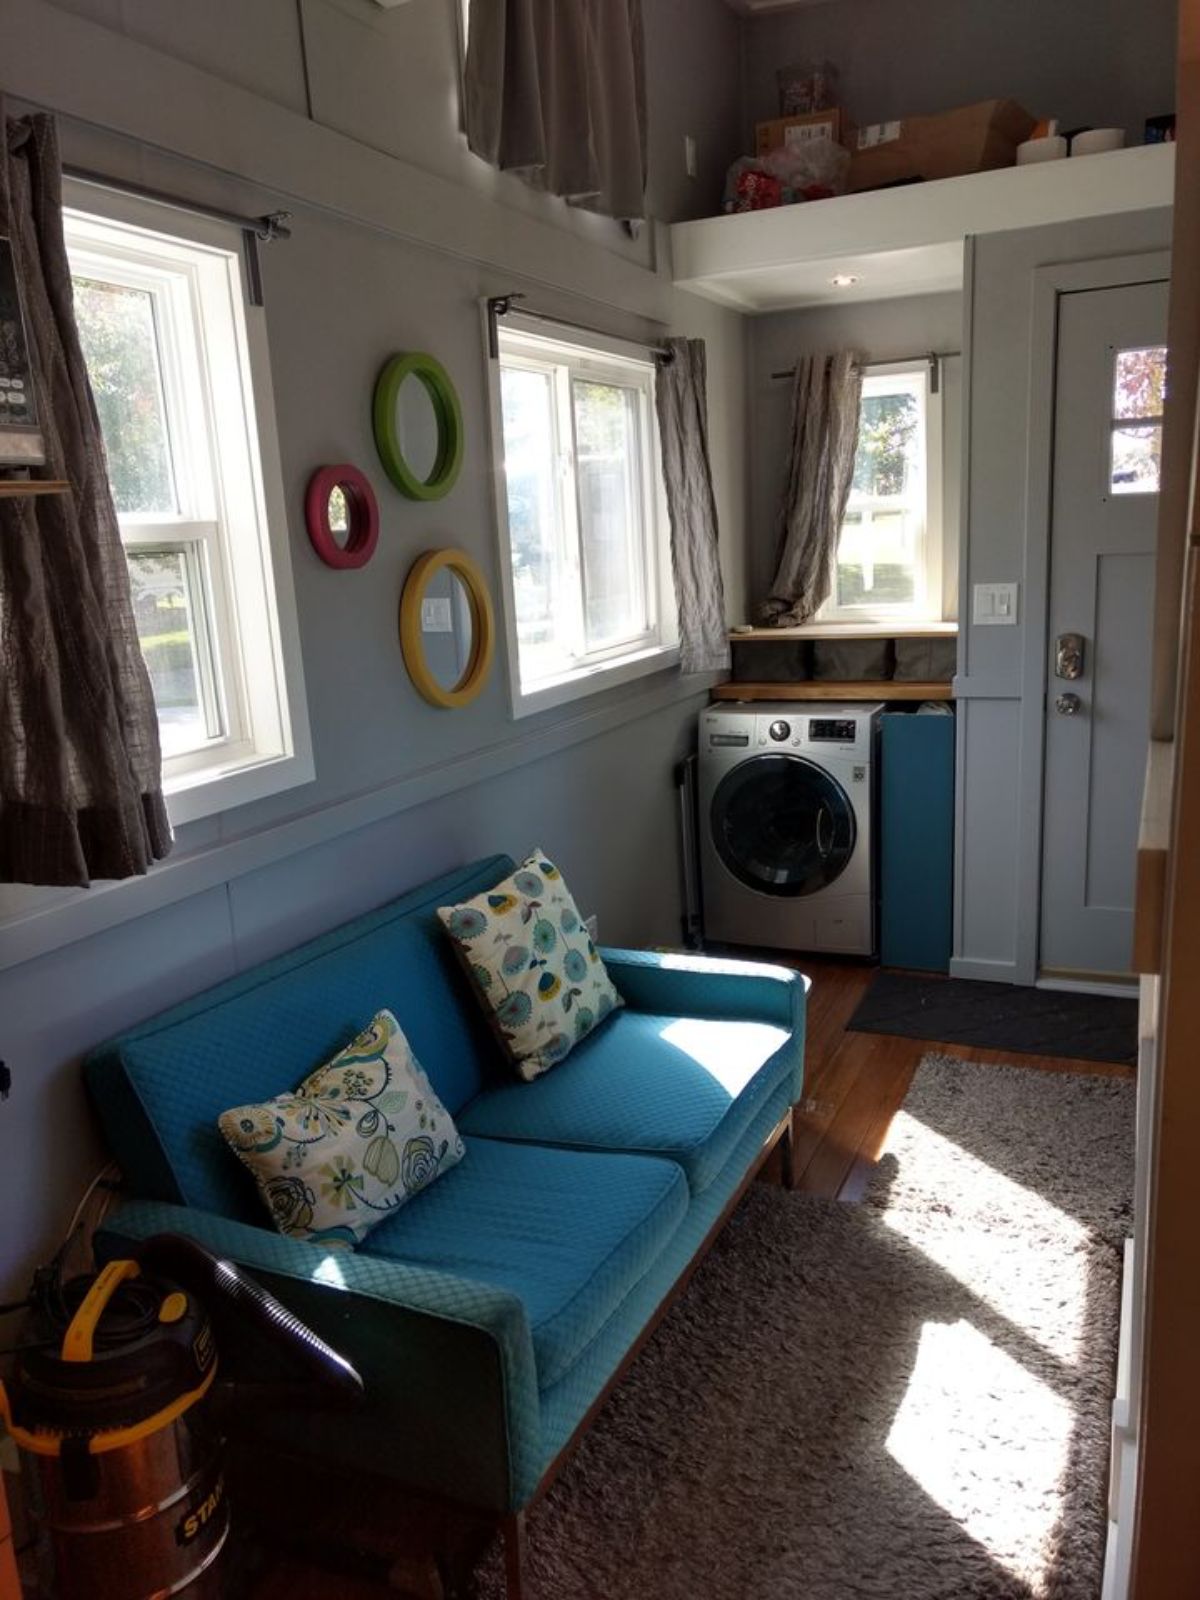 Living area of of 196 sf Tiny House on Wheels has a couch and washer dryer